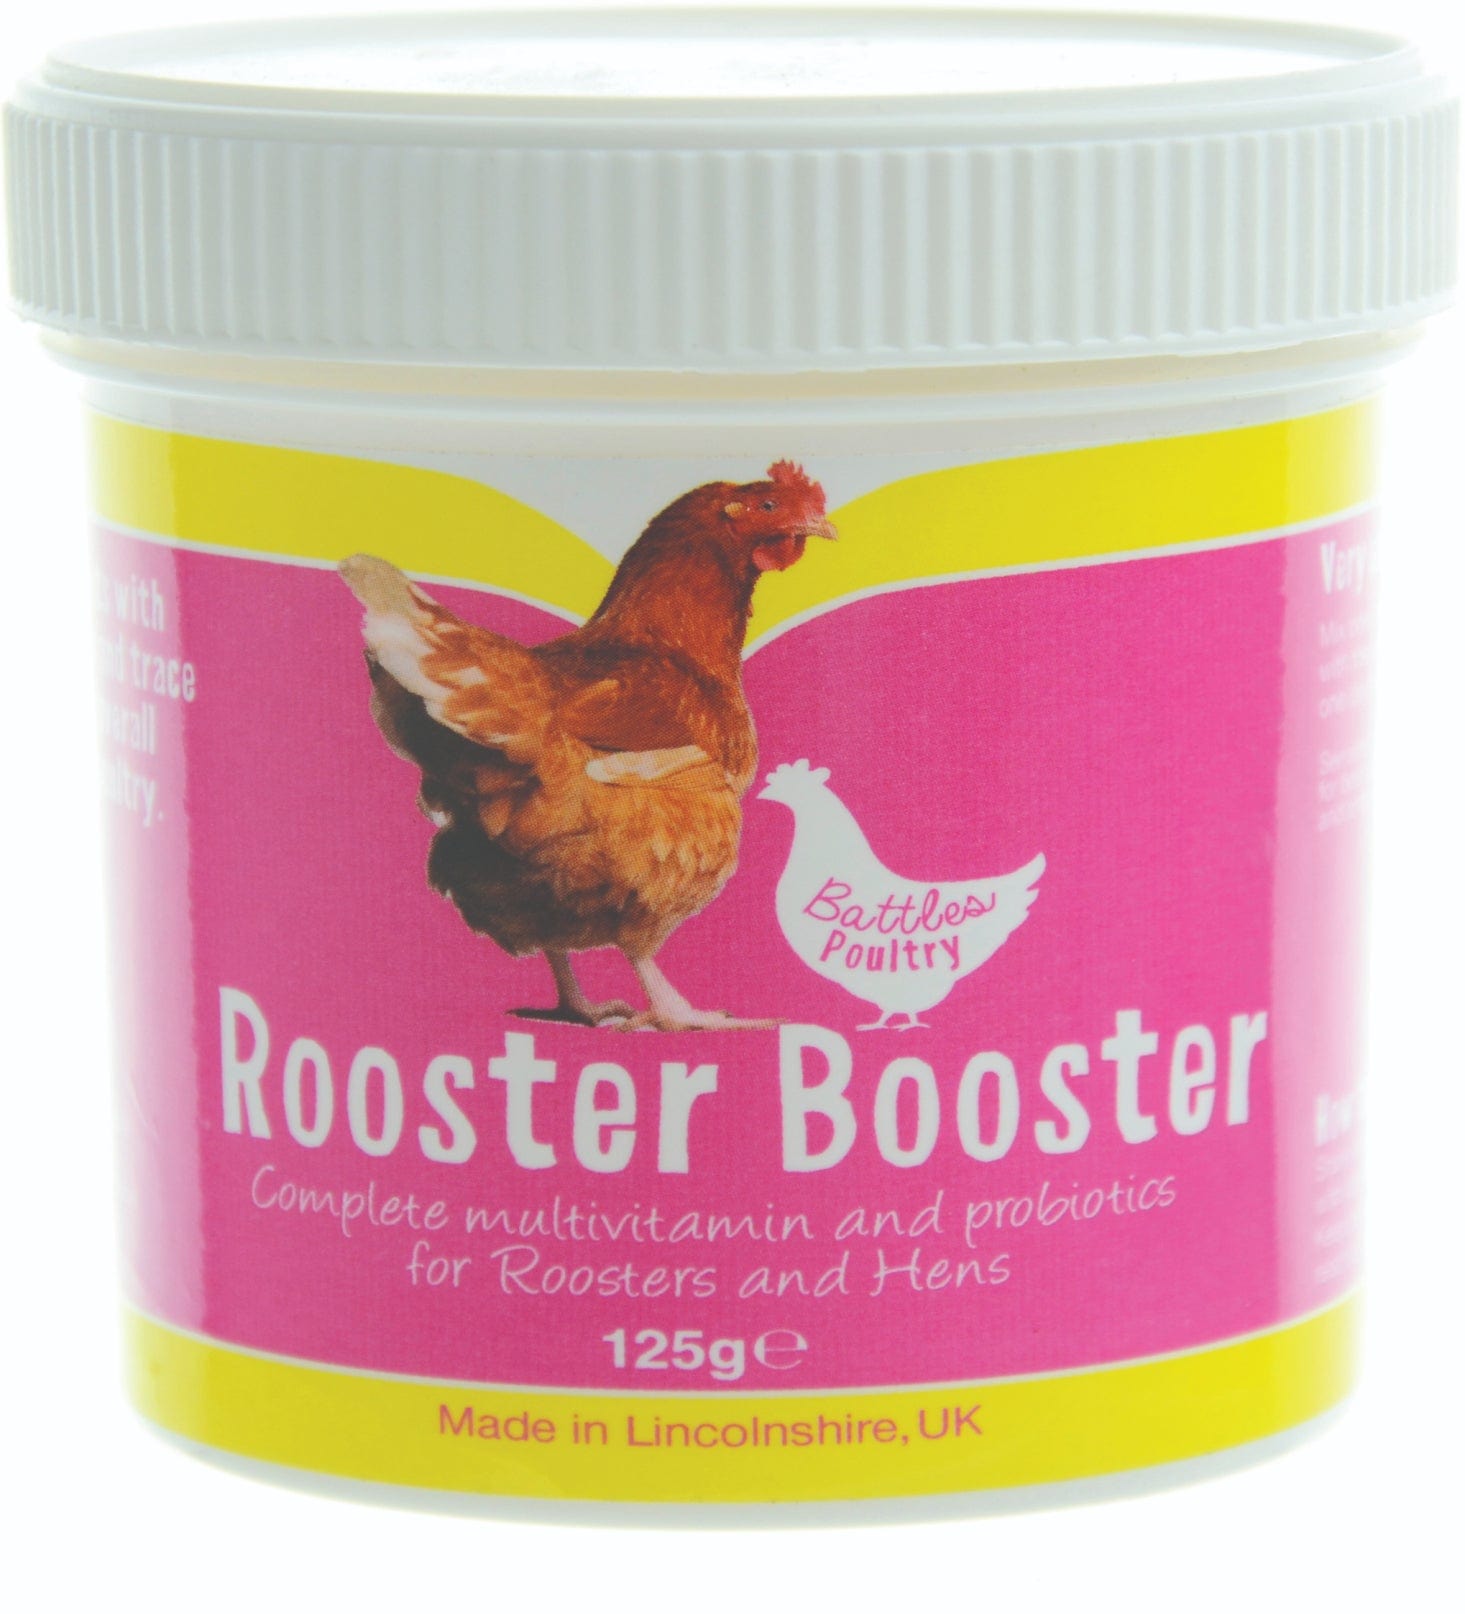 Battles poultry rooster booster